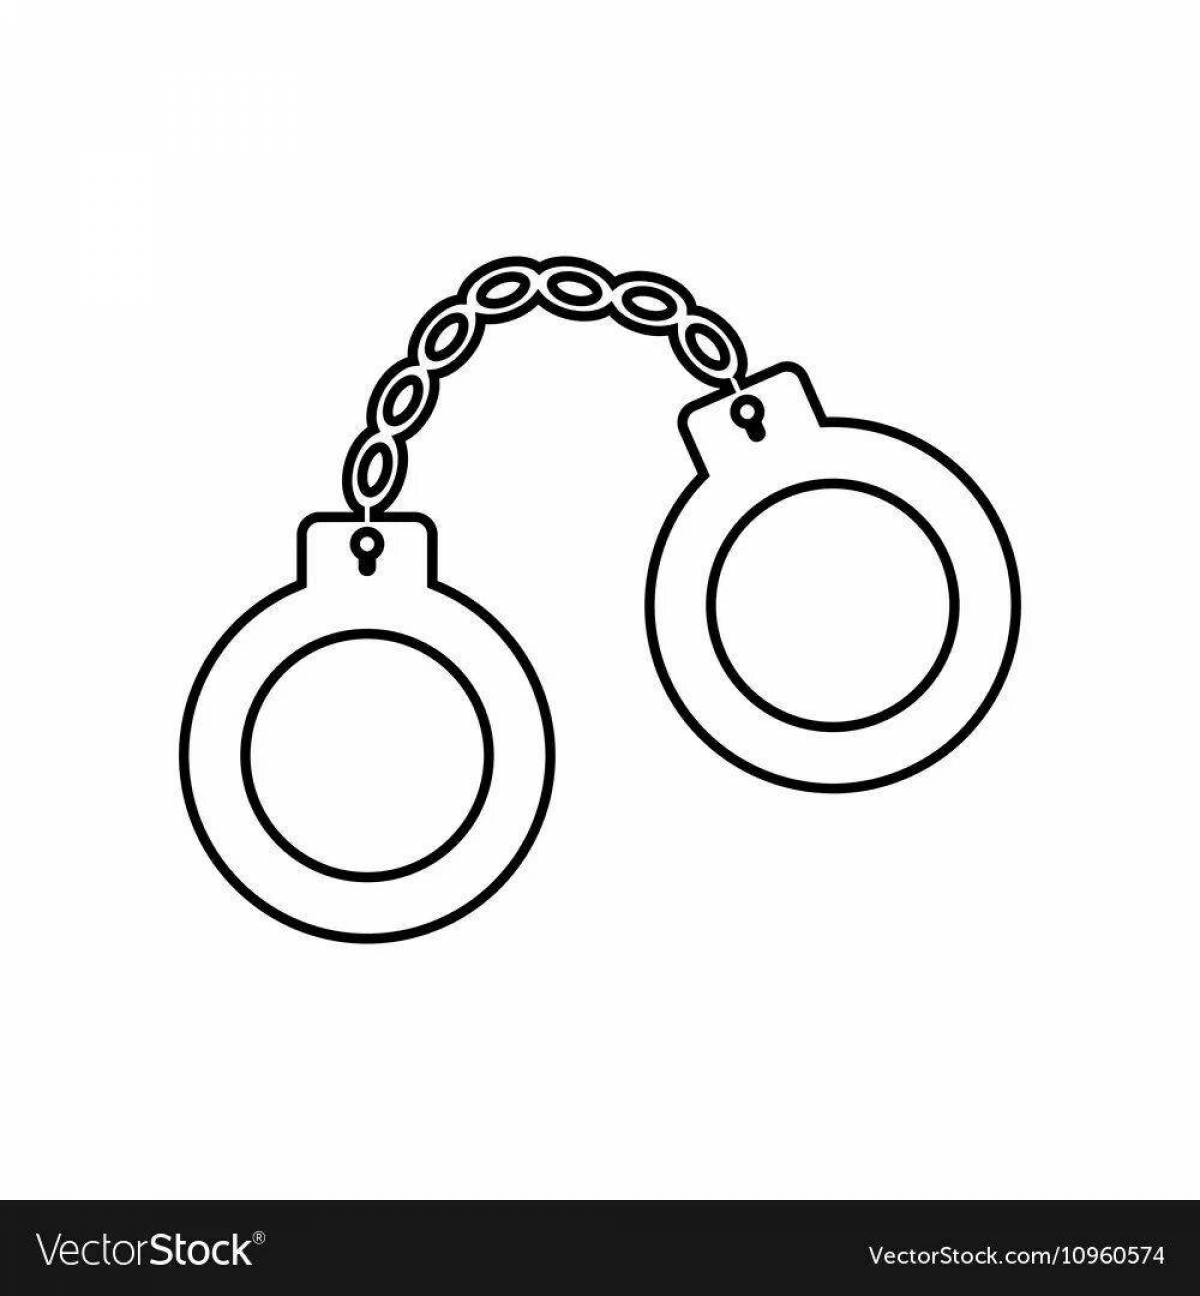 Coloring page delightful handcuffs